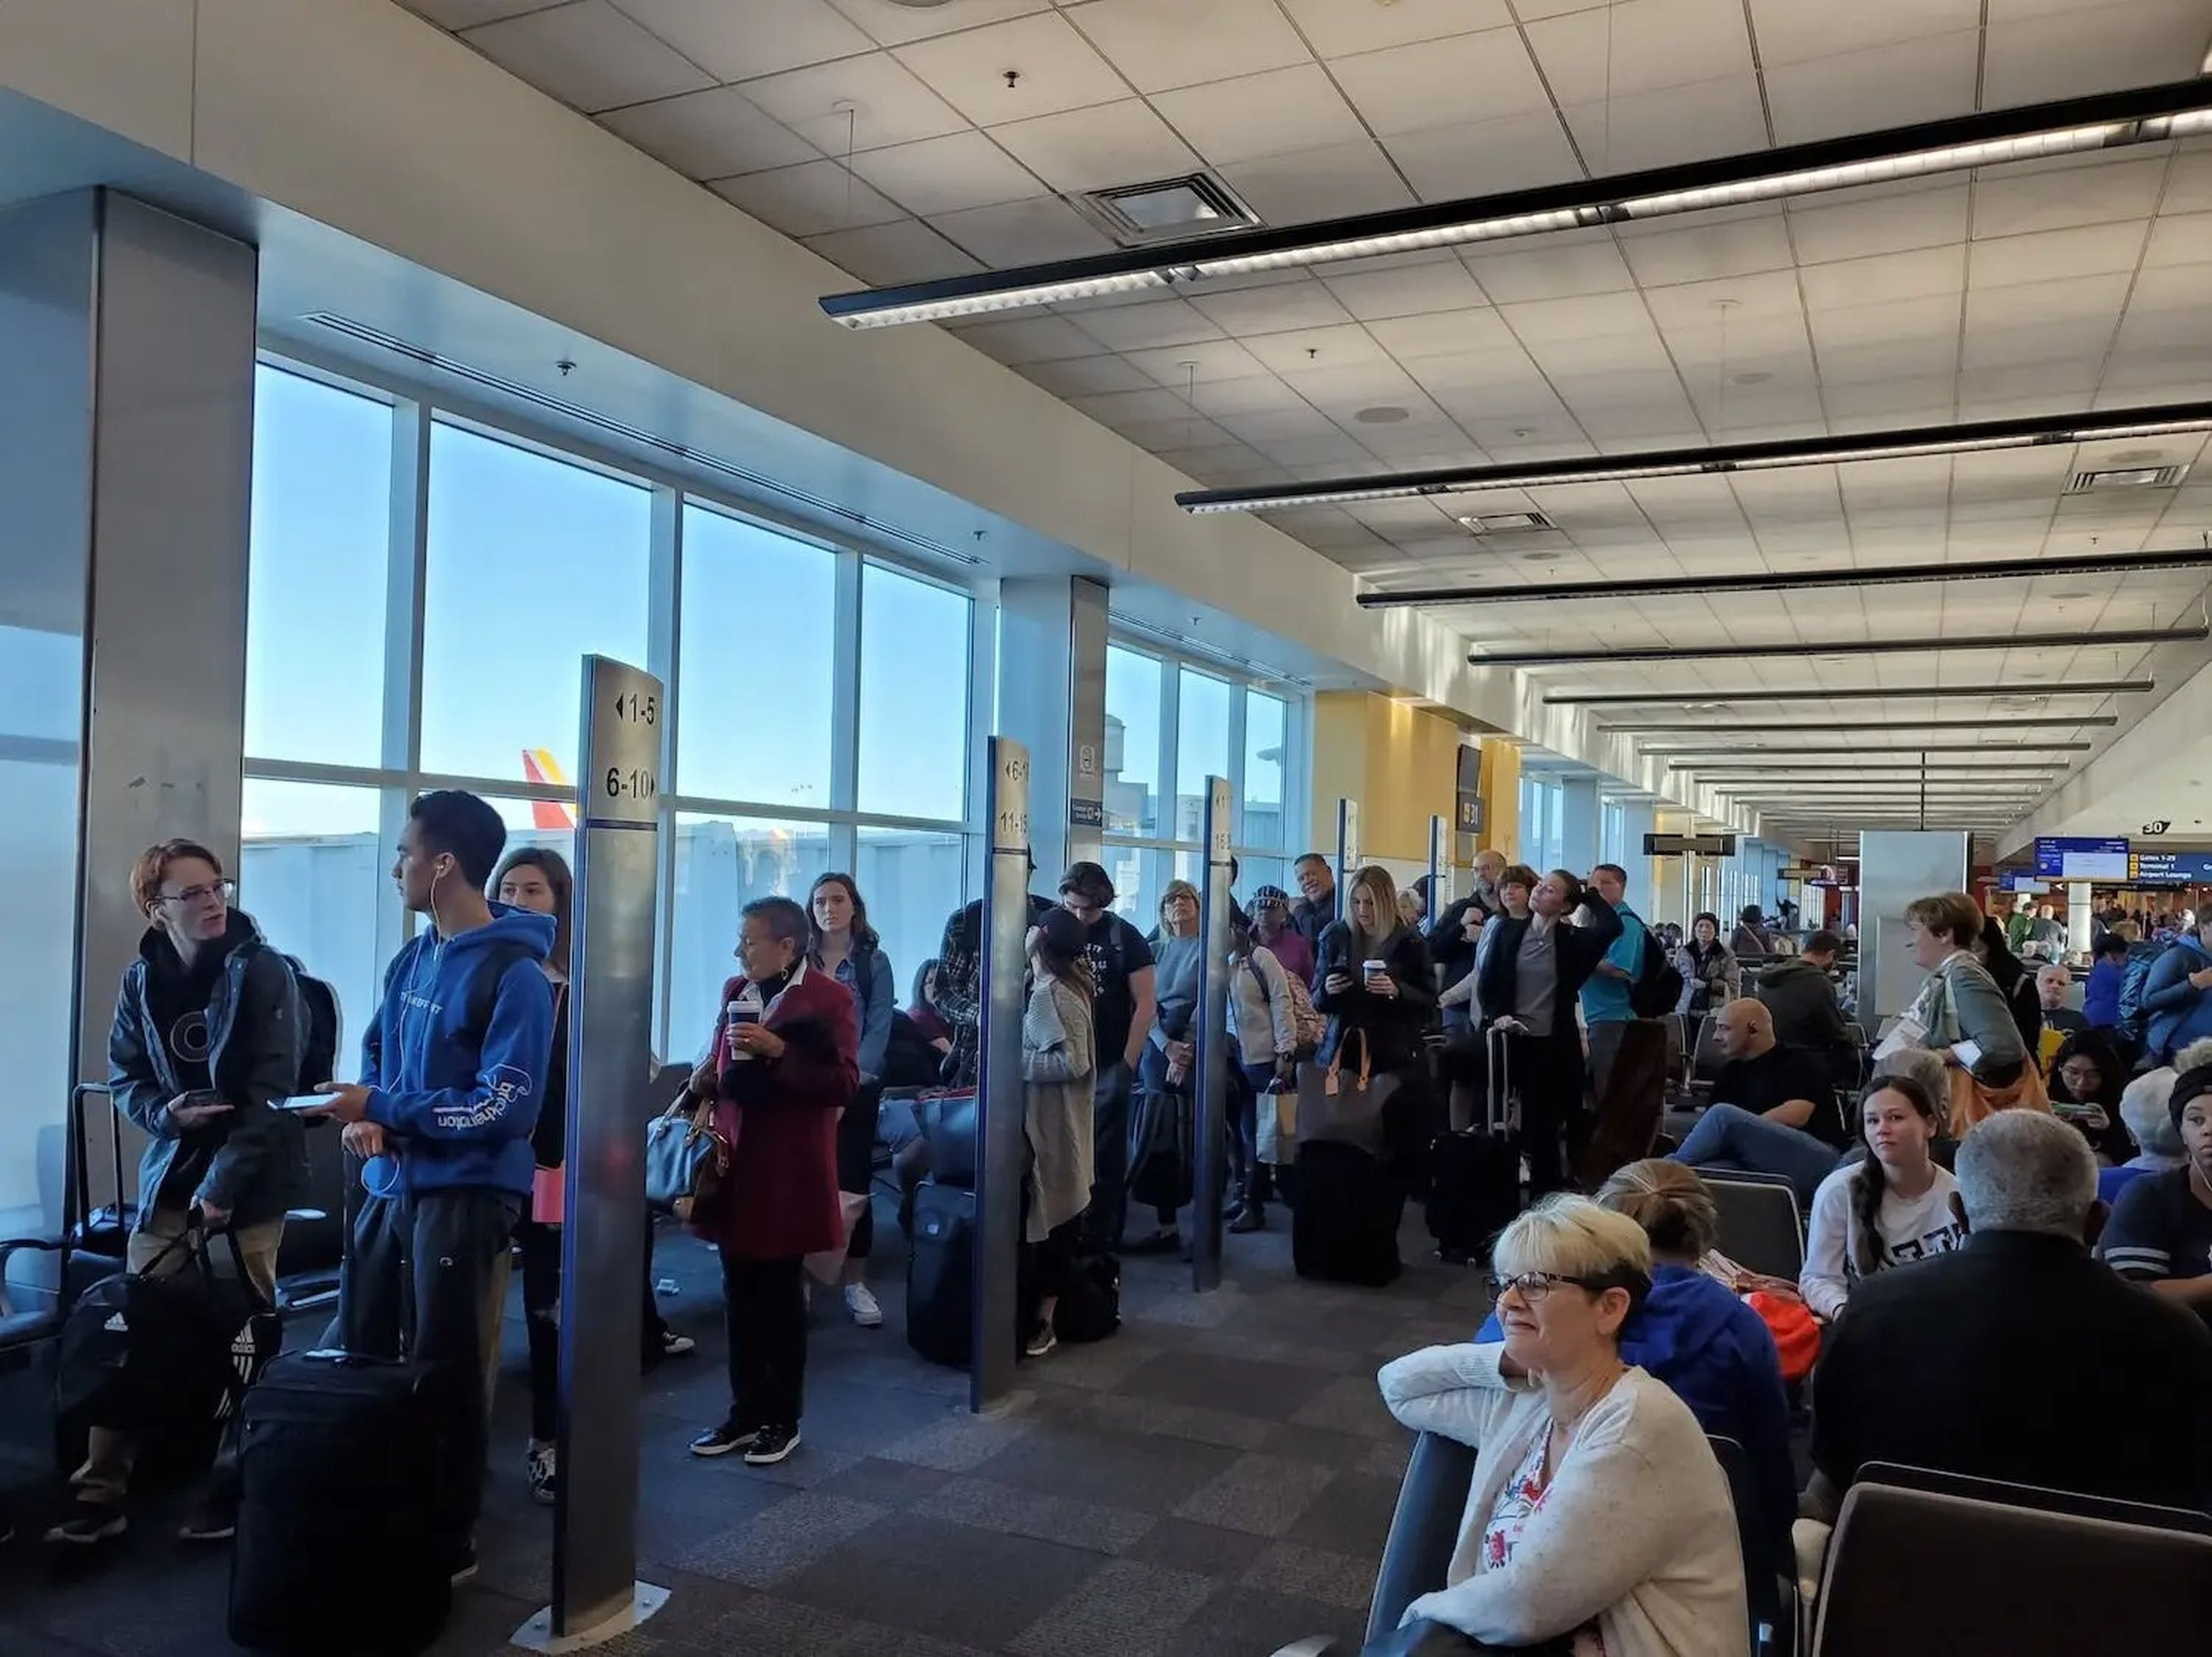 People line up based on boarding group numbers to board a Southwest Airlines flight.